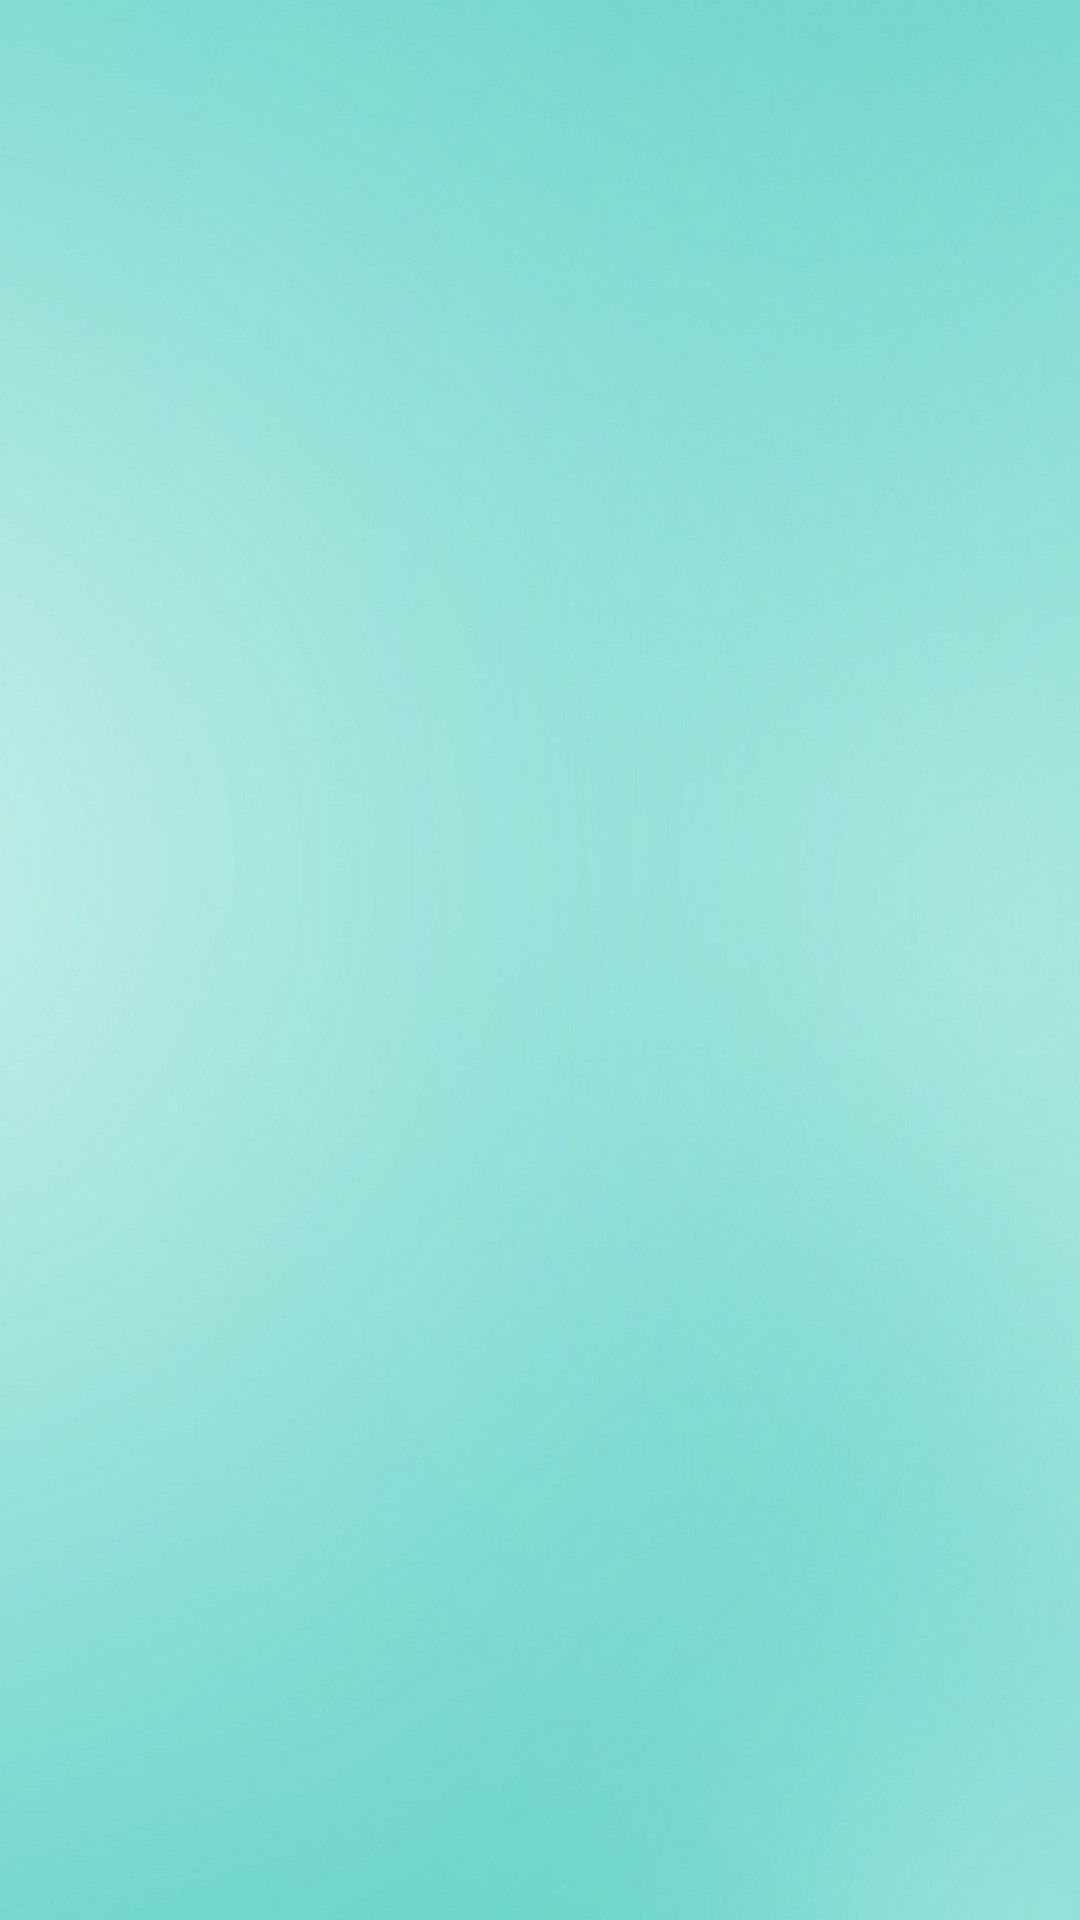 Mint Green Background For Android With .wallpapertip.com